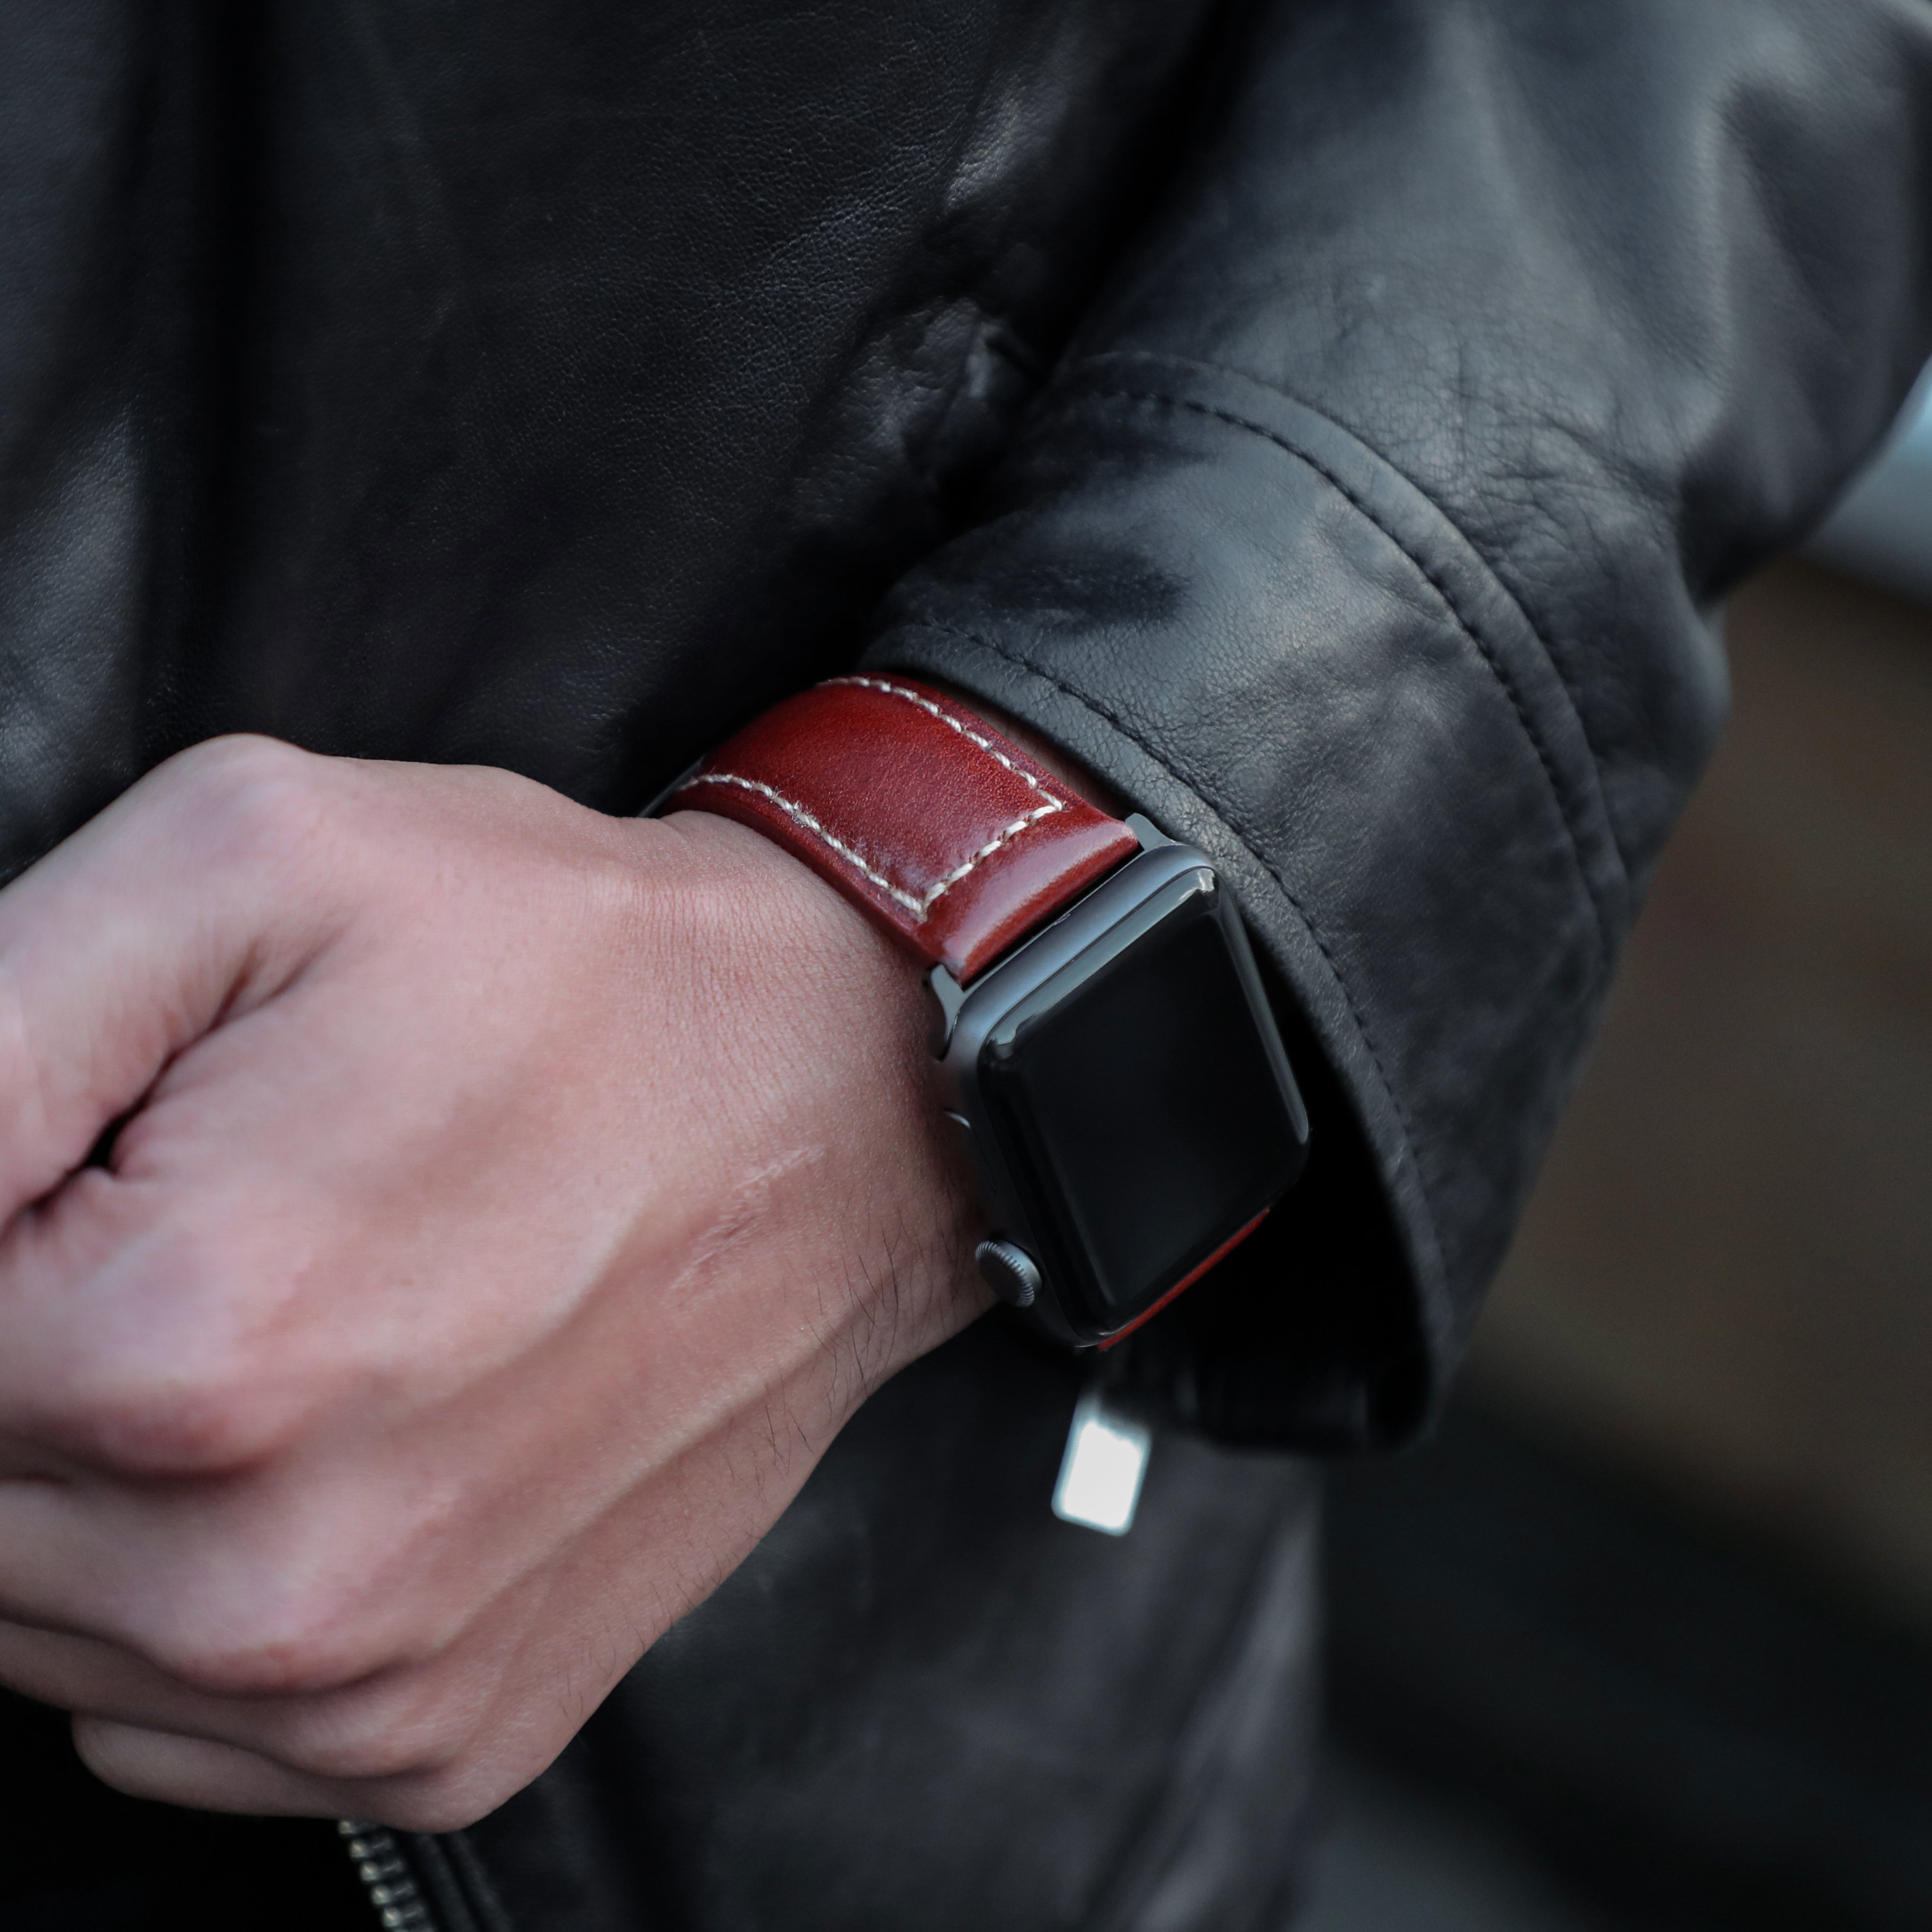 The brown leather Primus Apple Watch band adds a polished look to your wrist.